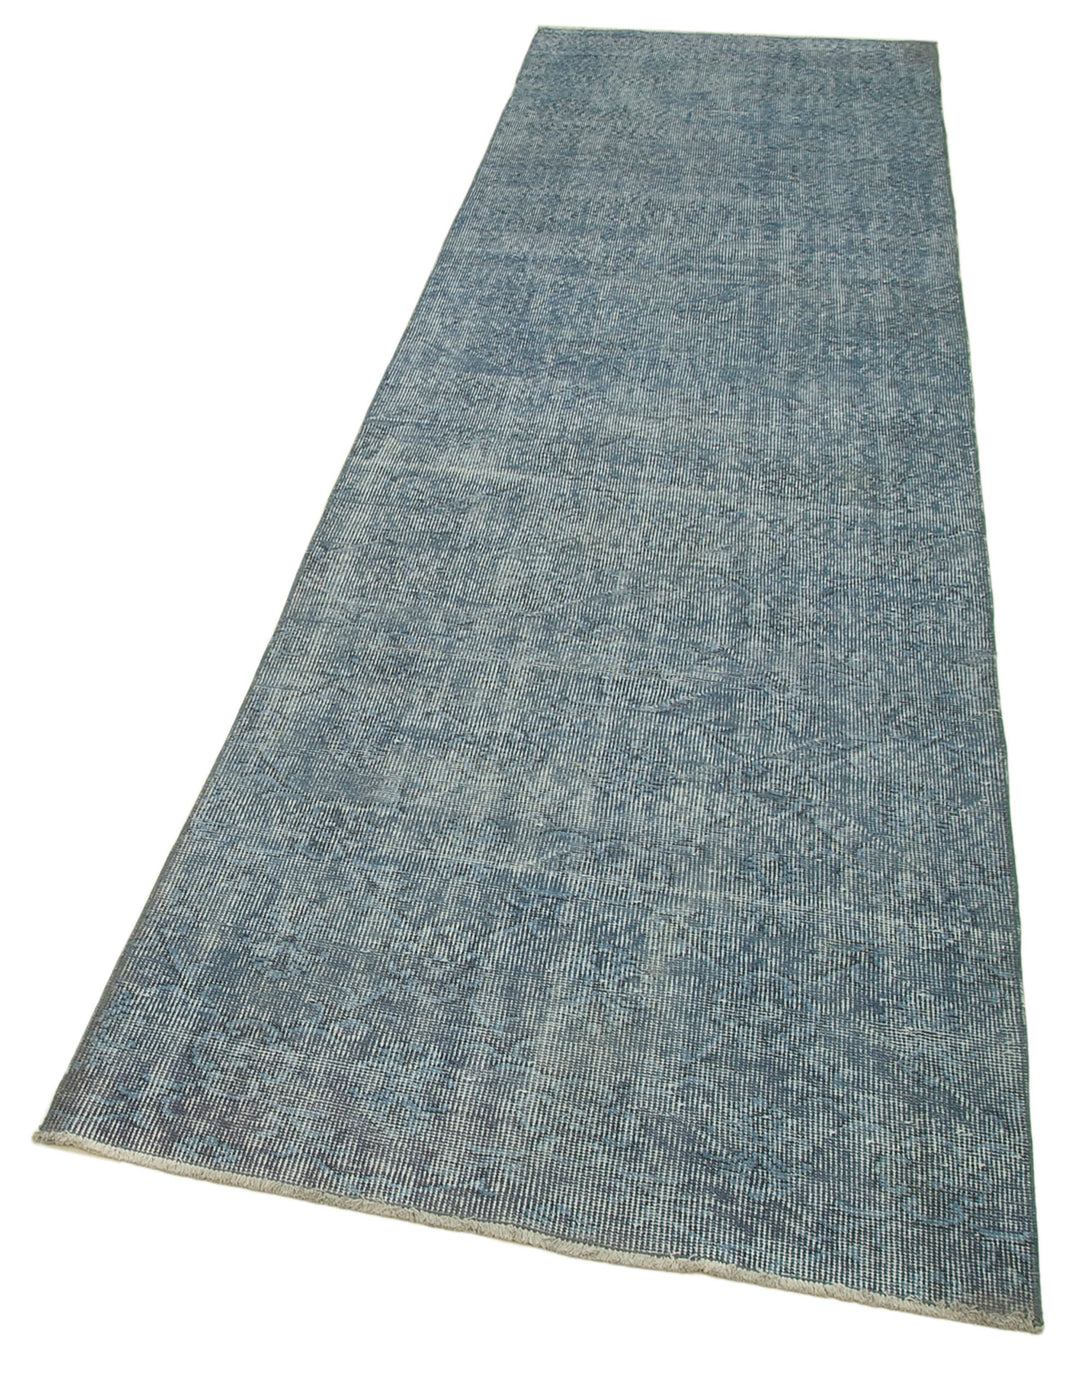 Handmade Overdyed Runner > Design# OL-AC-37196 > Size: 3'-0" x 11'-0", Carpet Culture Rugs, Handmade Rugs, NYC Rugs, New Rugs, Shop Rugs, Rug Store, Outlet Rugs, SoHo Rugs, Rugs in USA